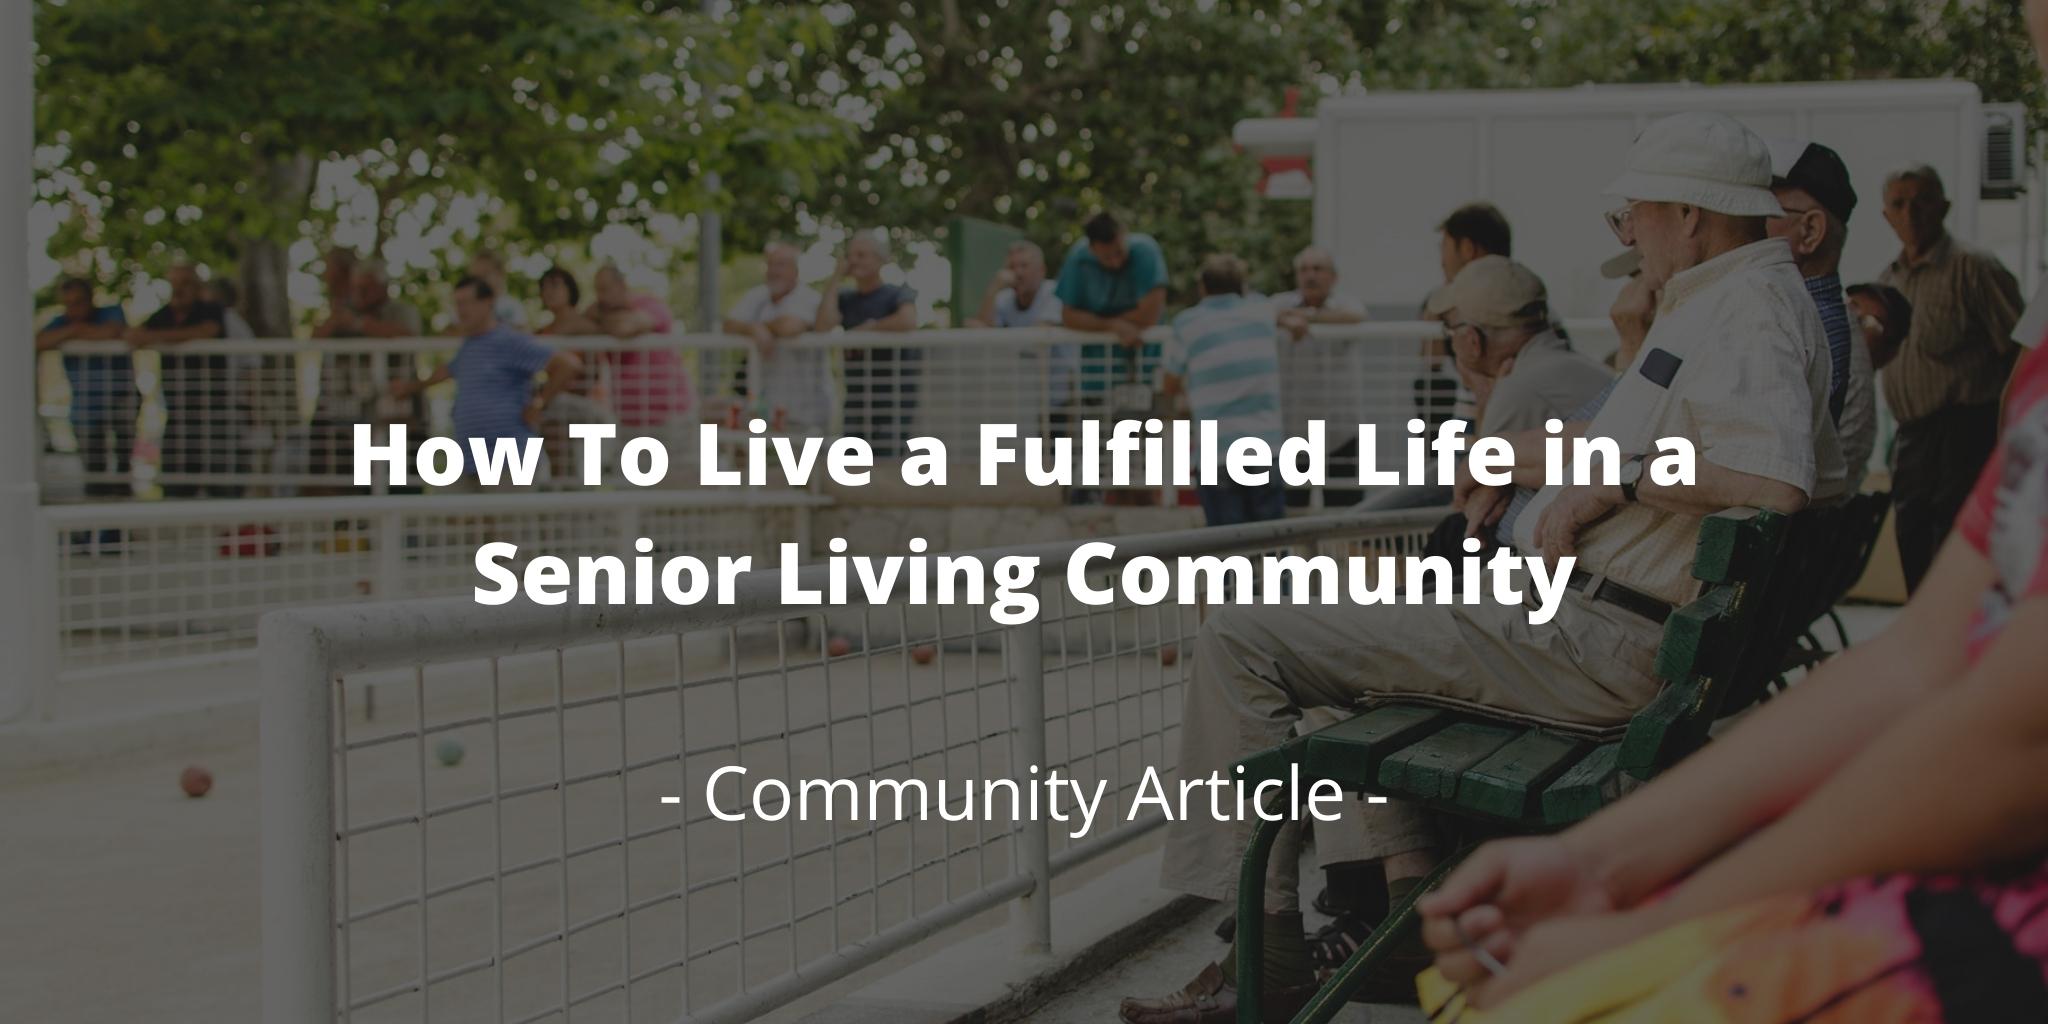 How To Live a Fulfilled Life in a Senior Living Community